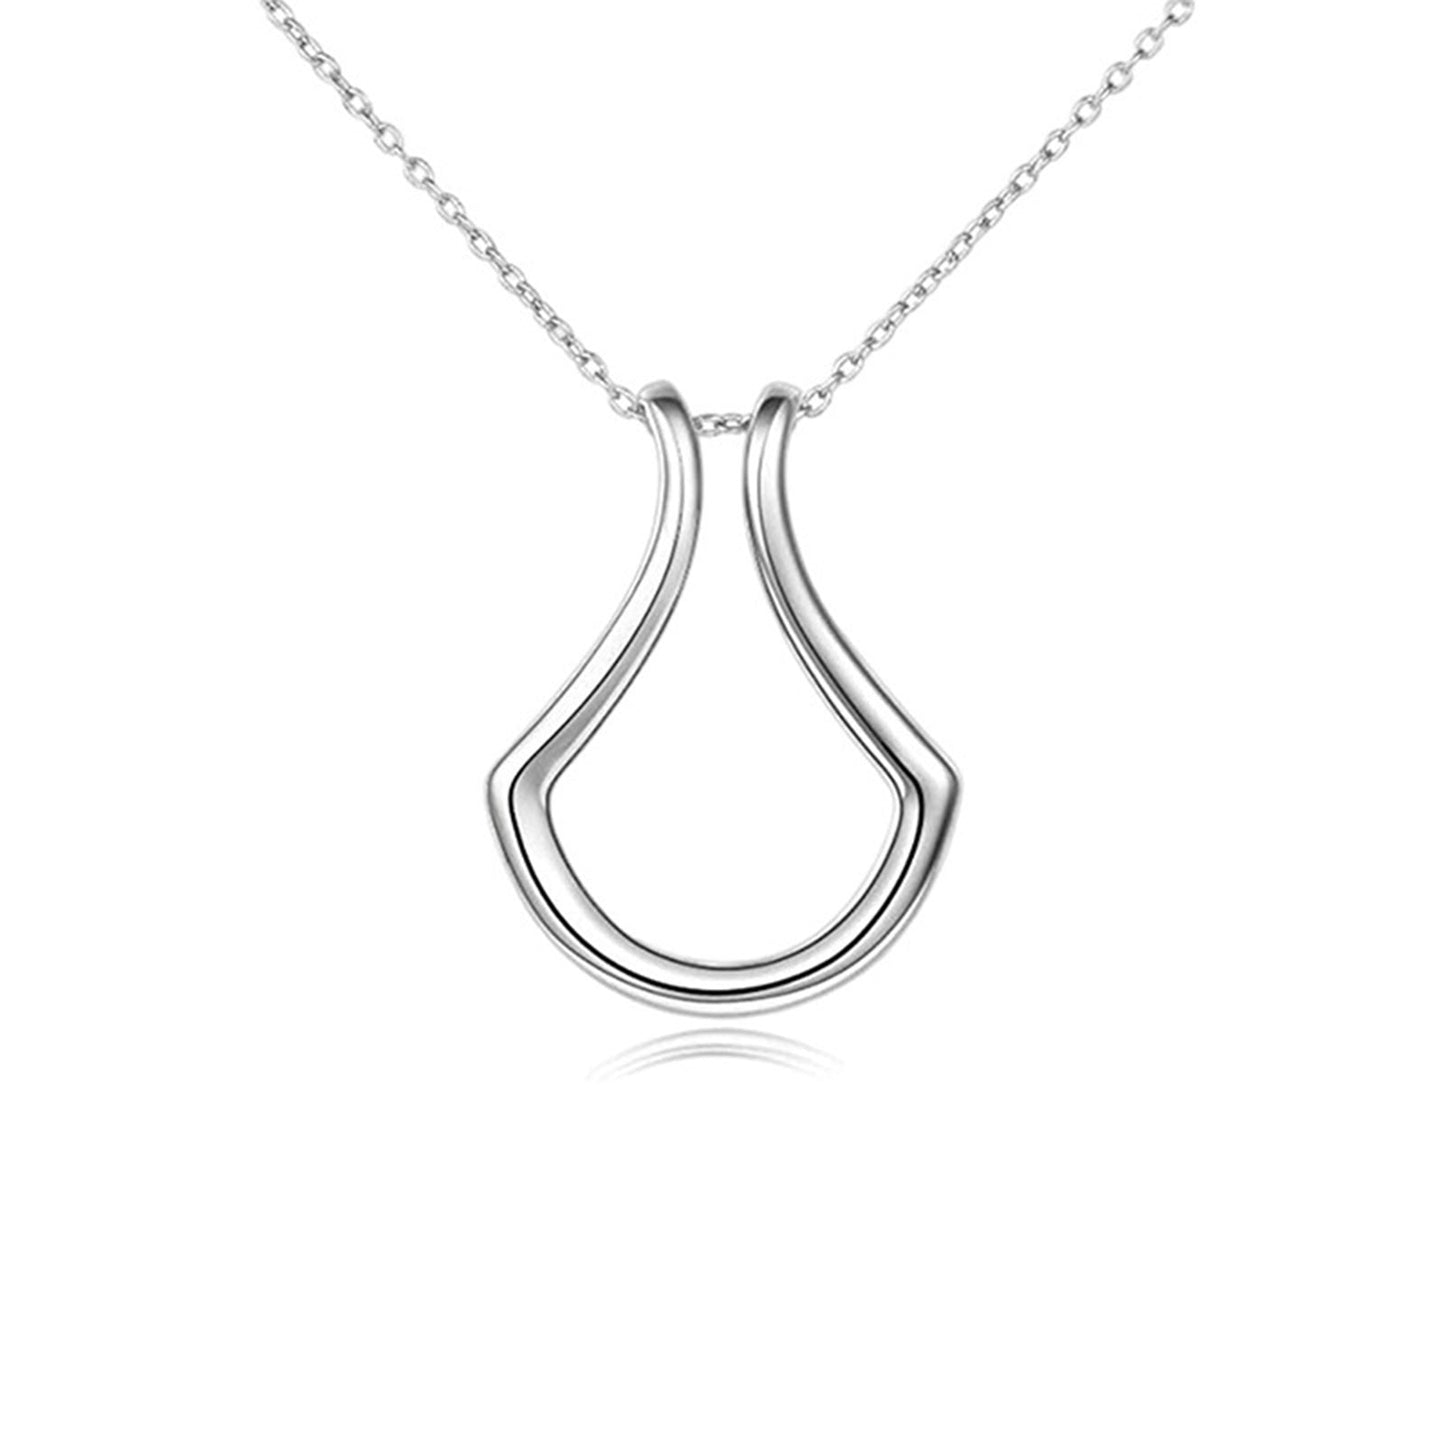 1Piece Fashion Necklace Geometric Simple Ring Holder Ring Pendant Necklace for Men Women Party Jewelry Neck Chain 45cm long